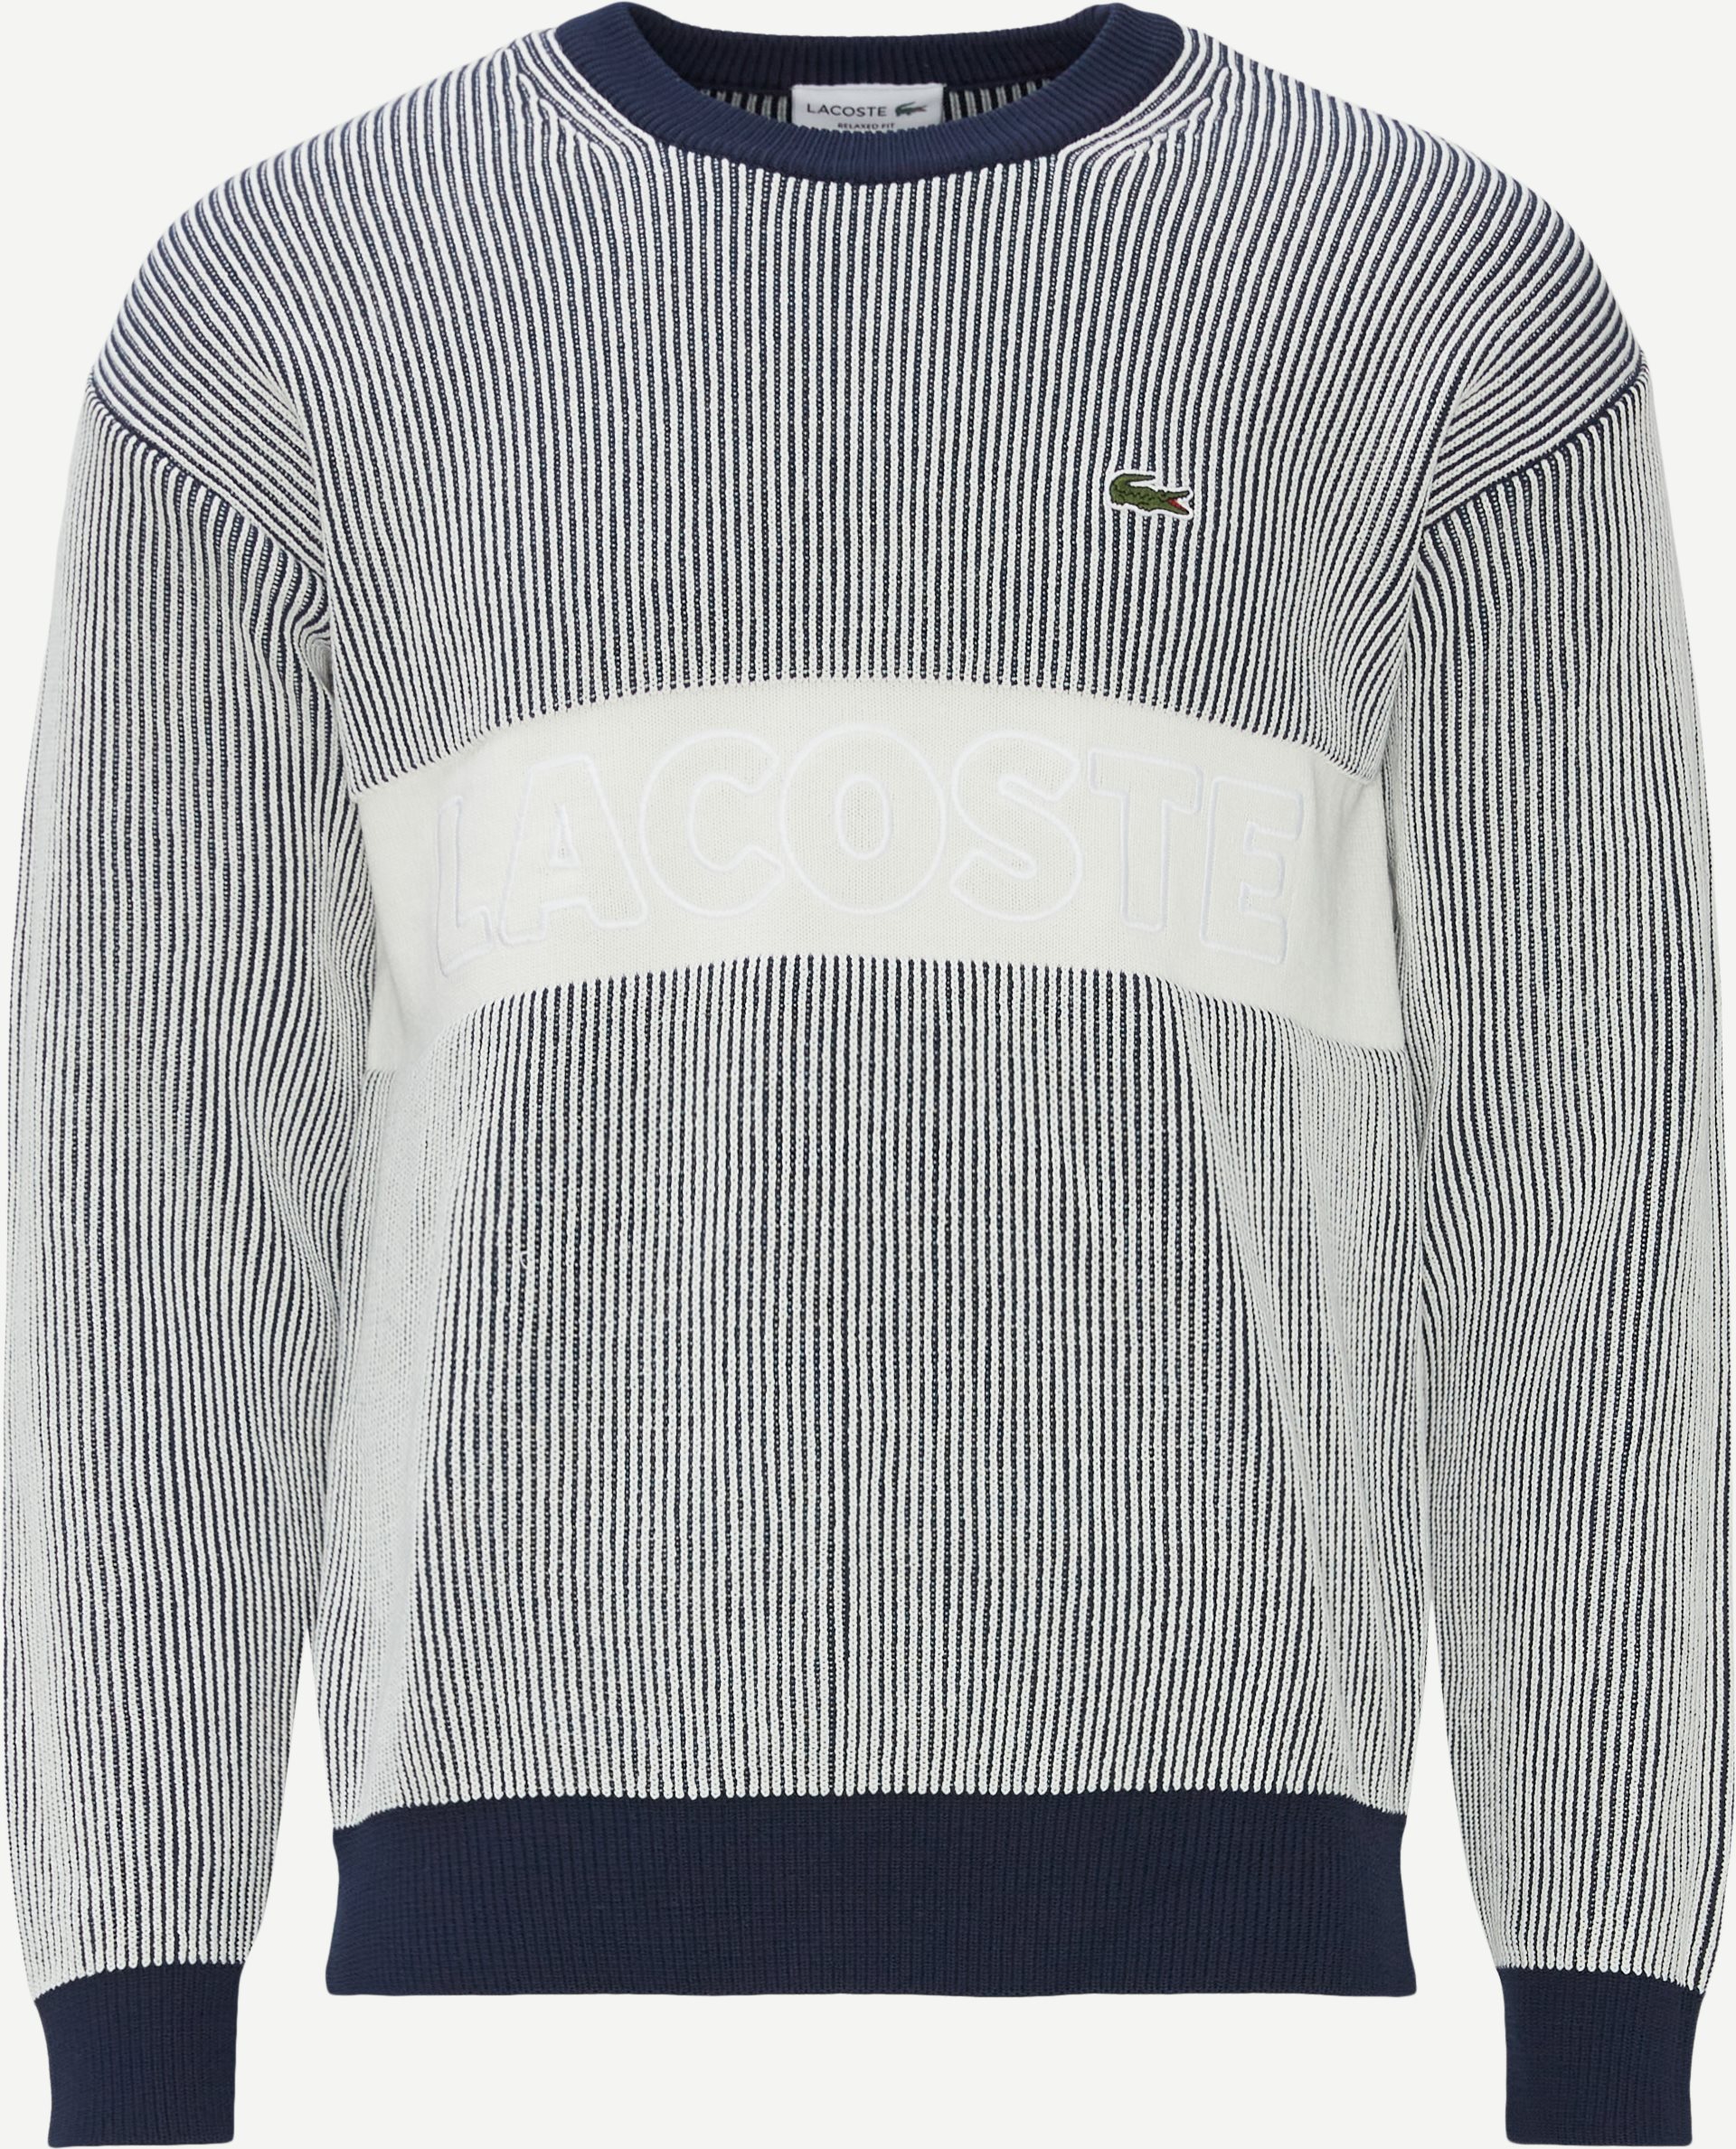 Knitwear - Relaxed fit - Blue